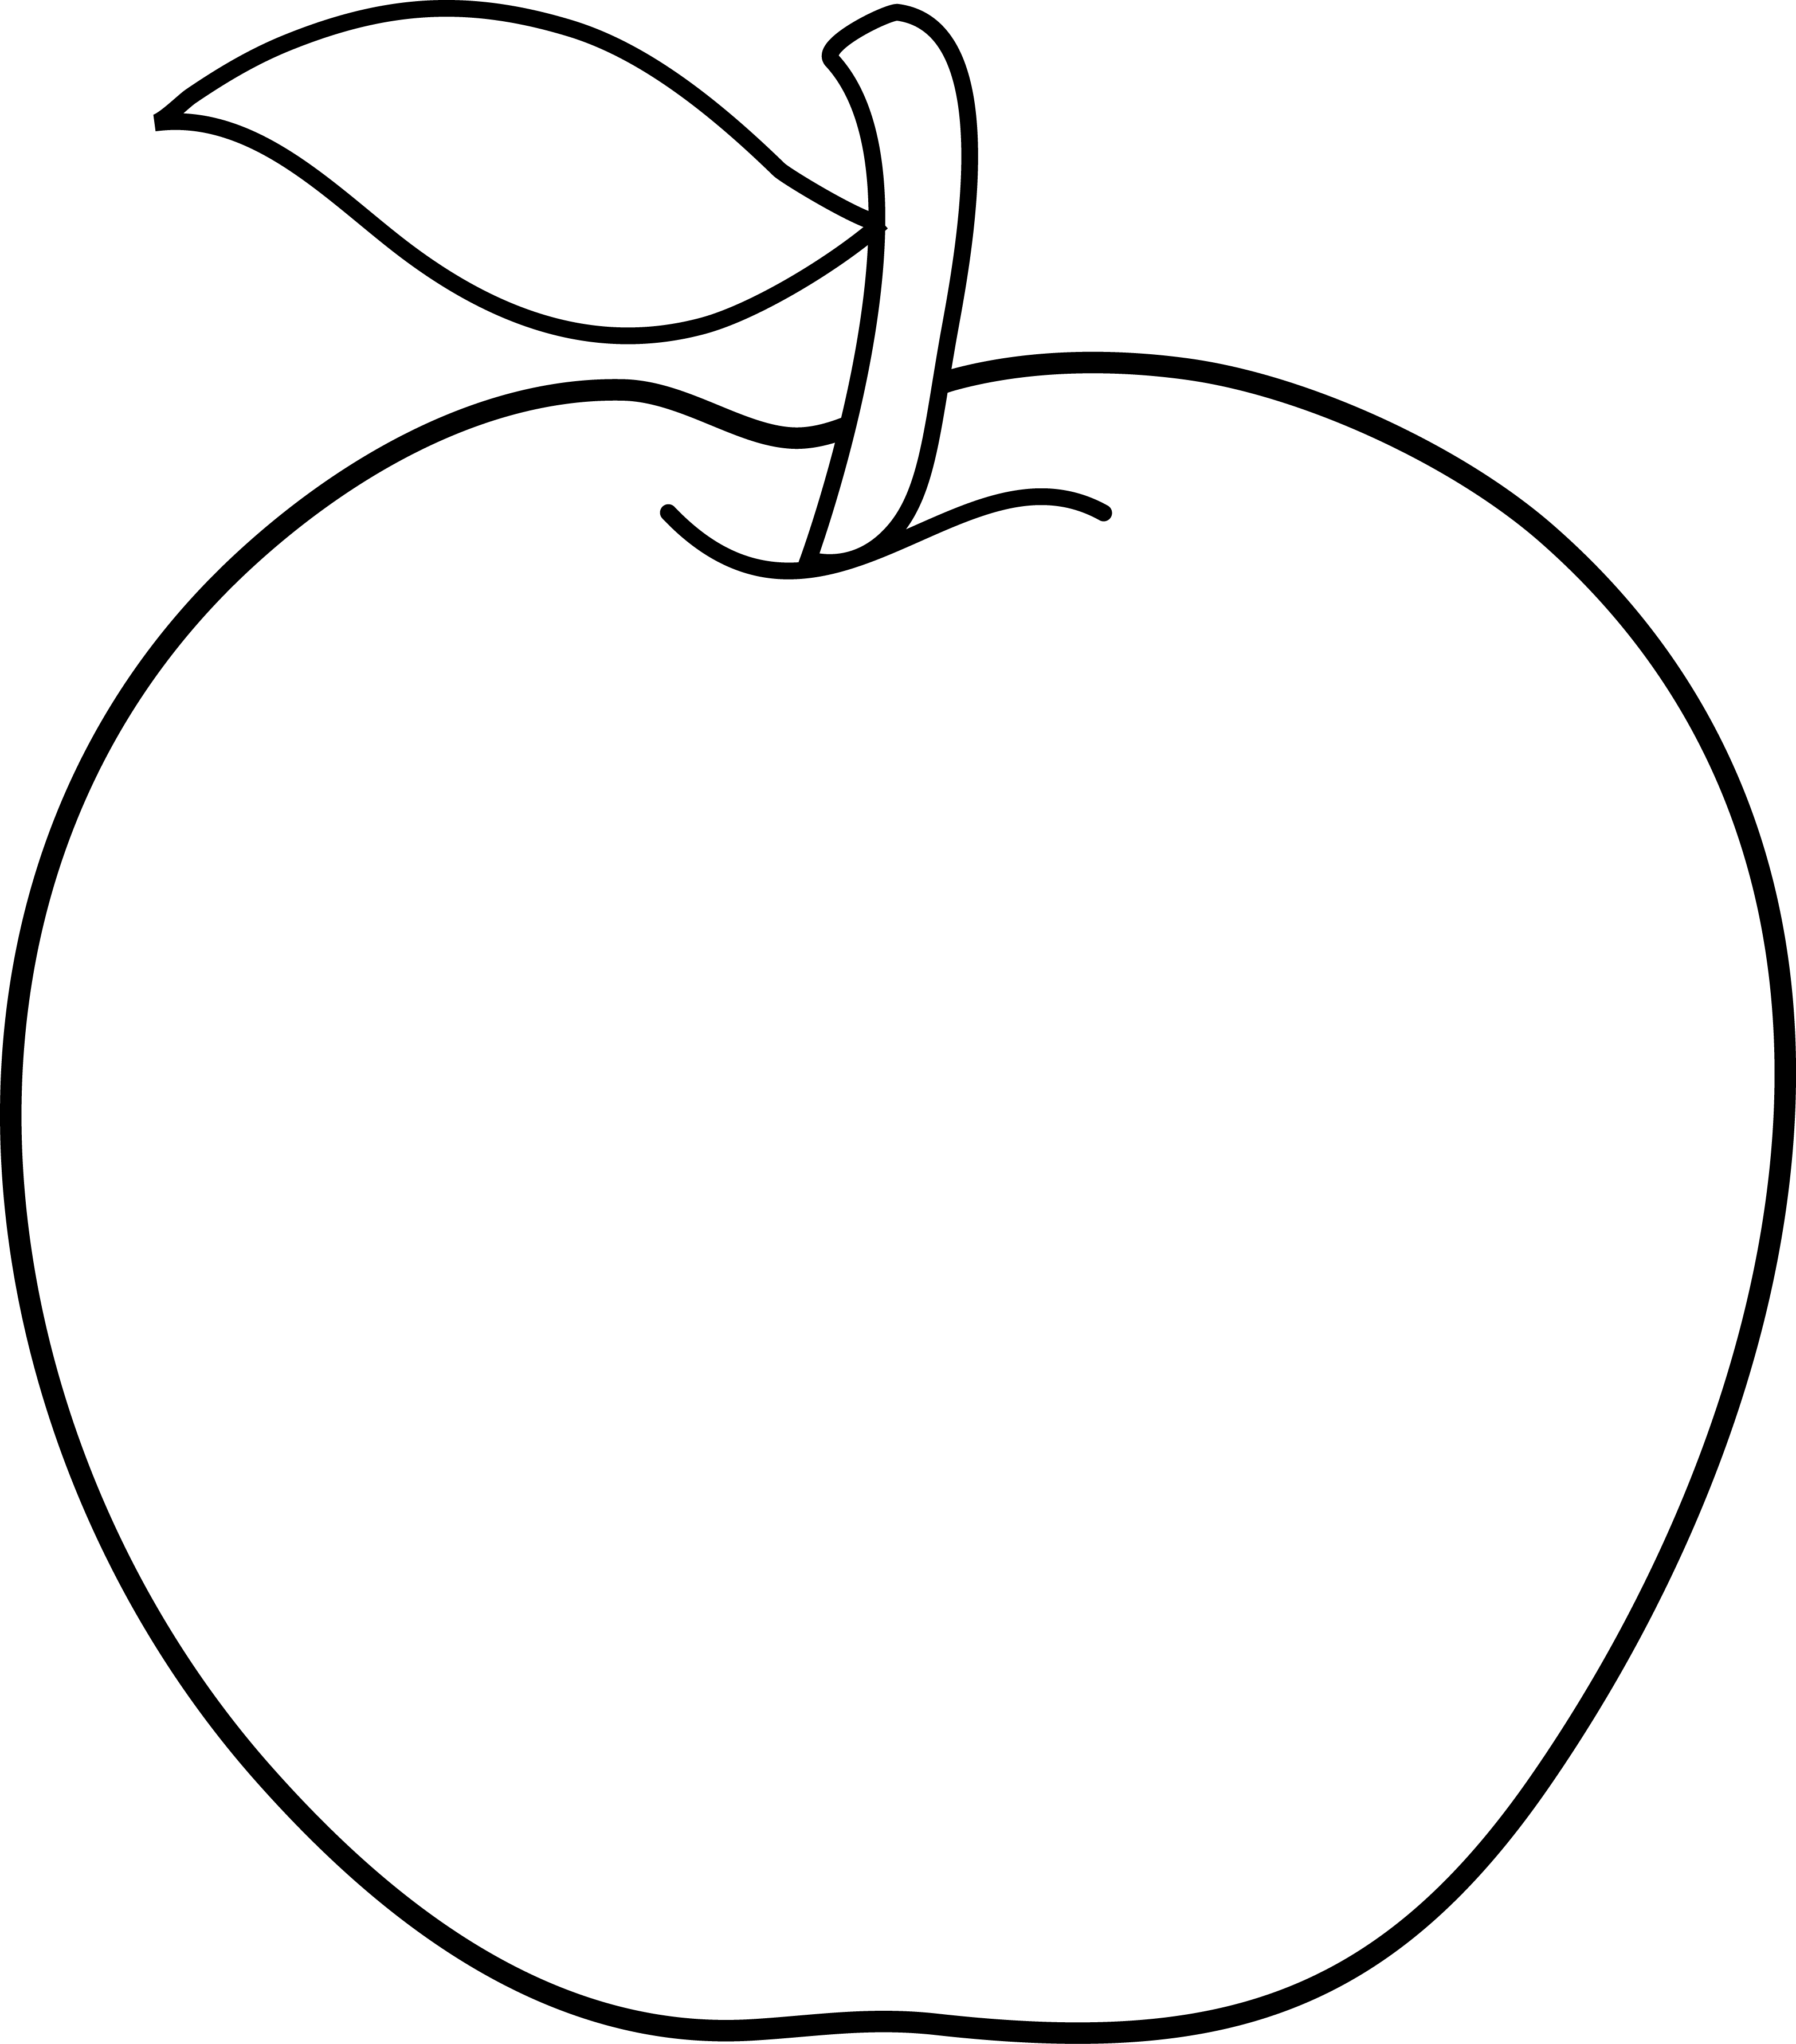 Images For > Apple Orchard Clip Art Black And White